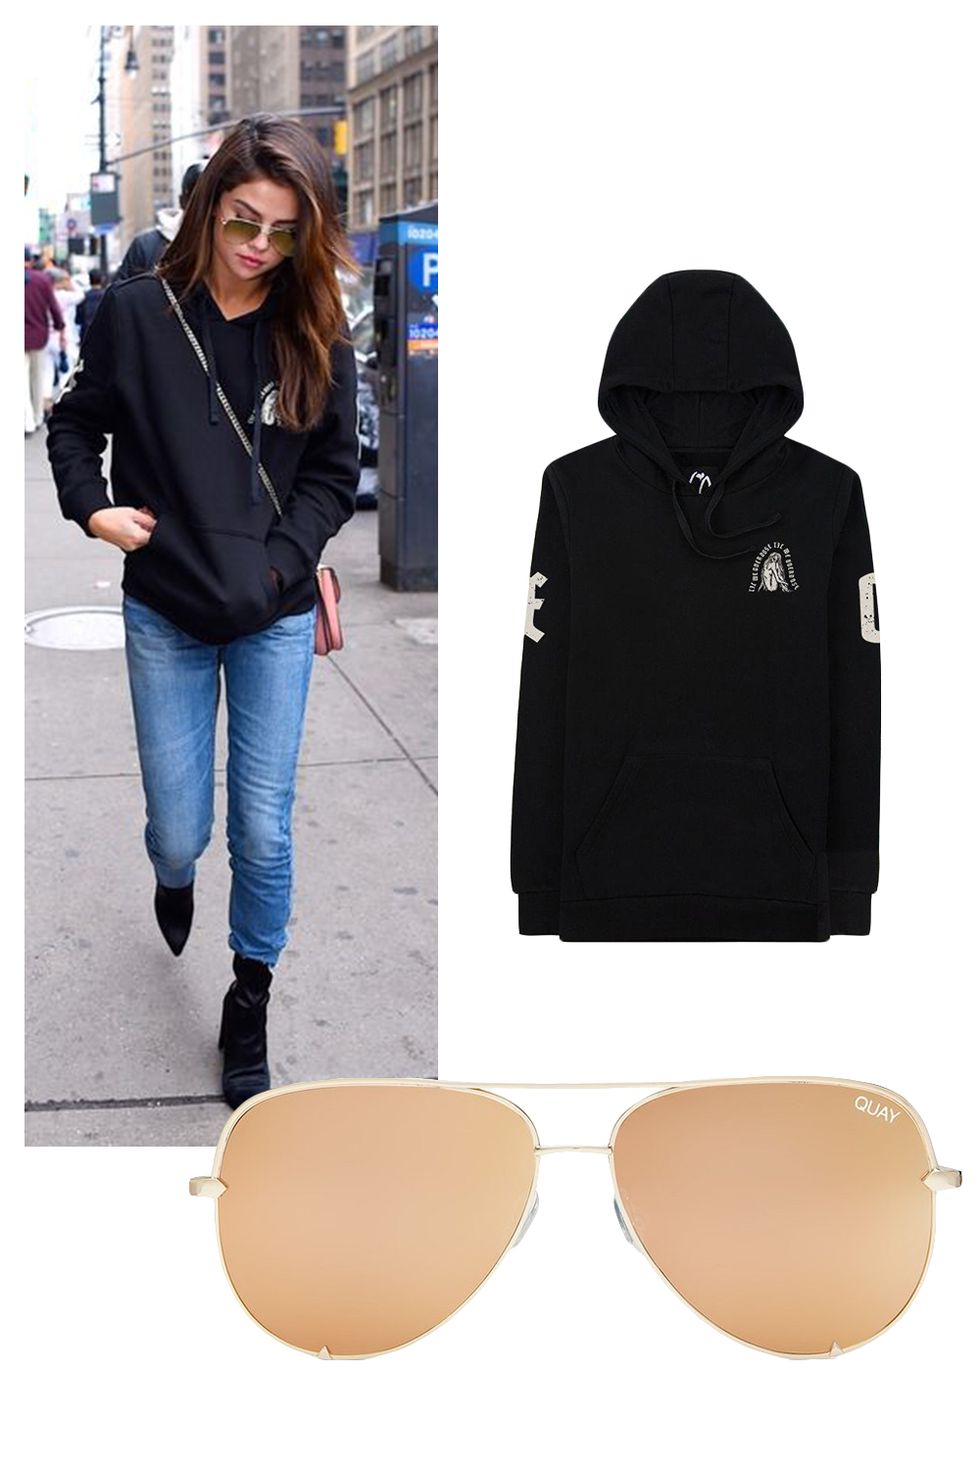 6 Celebrity Hoodie Outfits to Copy and Shop Right Now